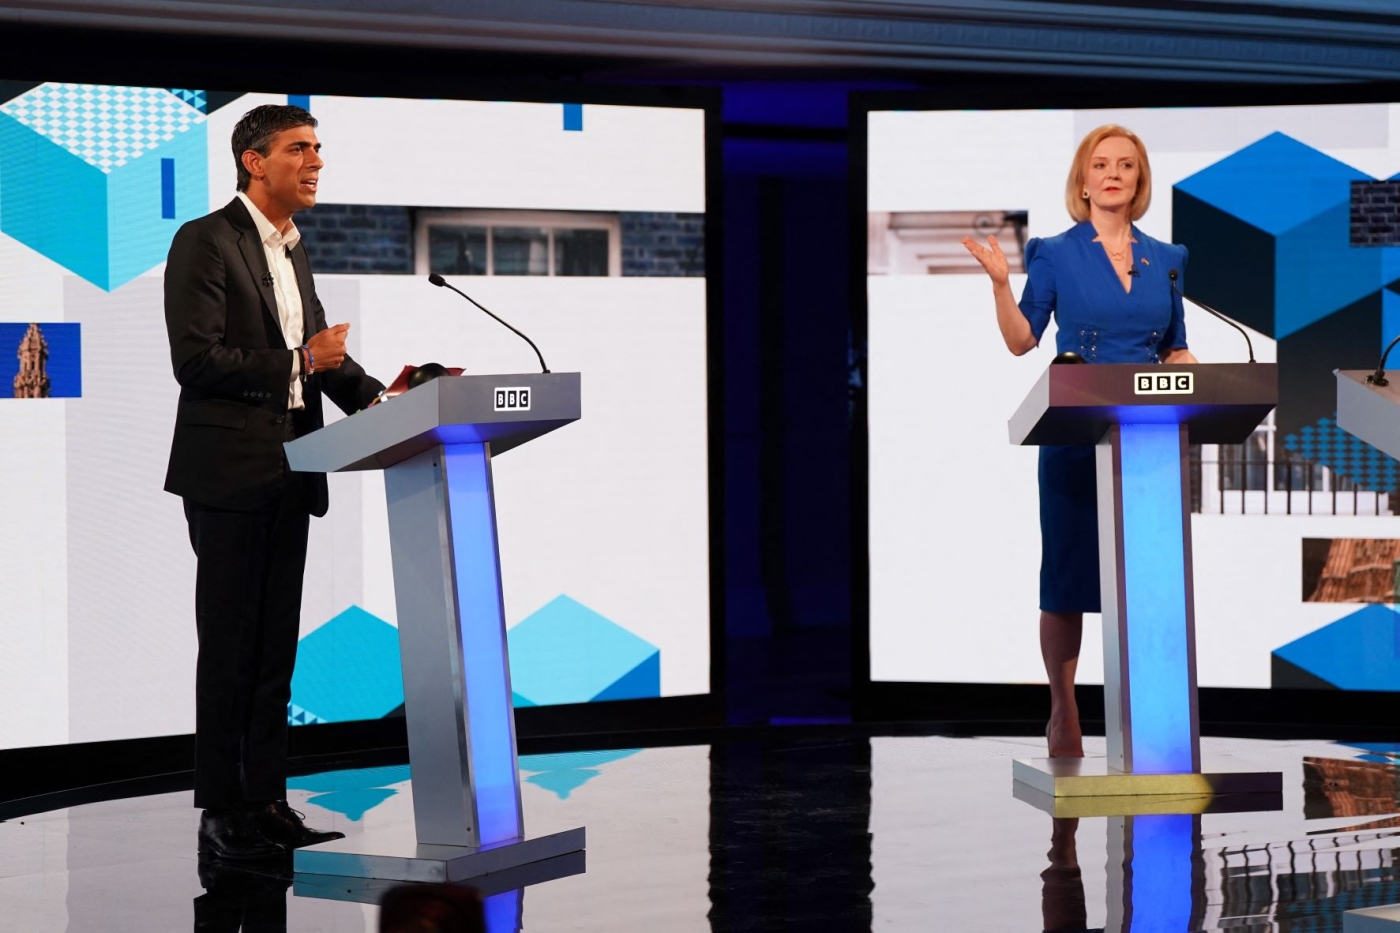 Britain's Foreign Secretary Liz Truss (R) and former chancellor to the exchequer Rishi Sunak, contenders to become the country's next prime minister, take part in the BBC's 'The UK's Next Prime Minister: The Debate' in Victoria Hall in Stoke-on-Trent, central England, on July 25, 2022 (AFP)